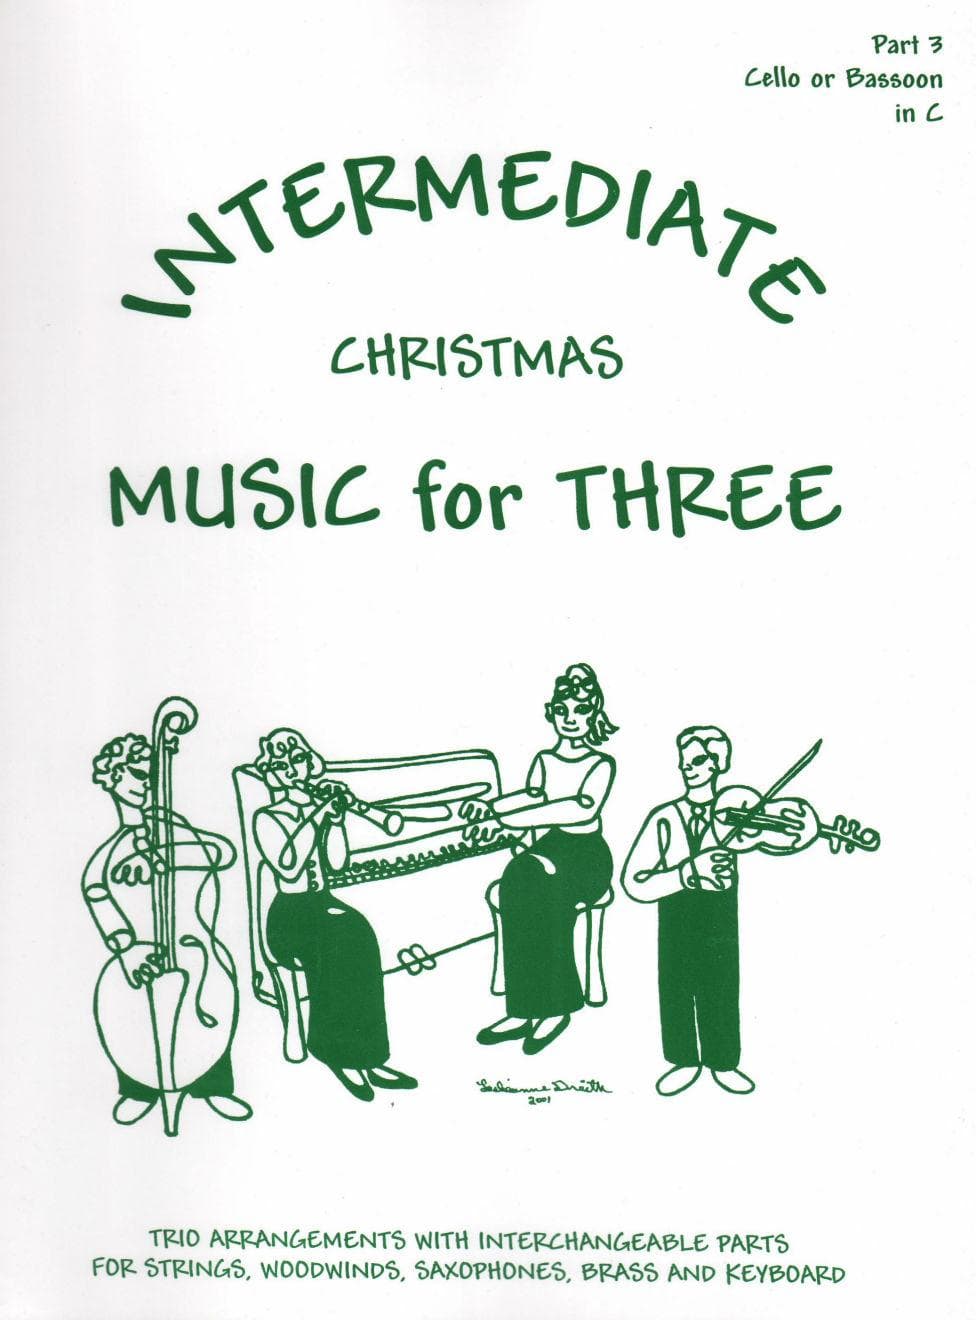 Music for Three, Christmas Part 3 for Cello or Bassoon Published by Last Resort Music